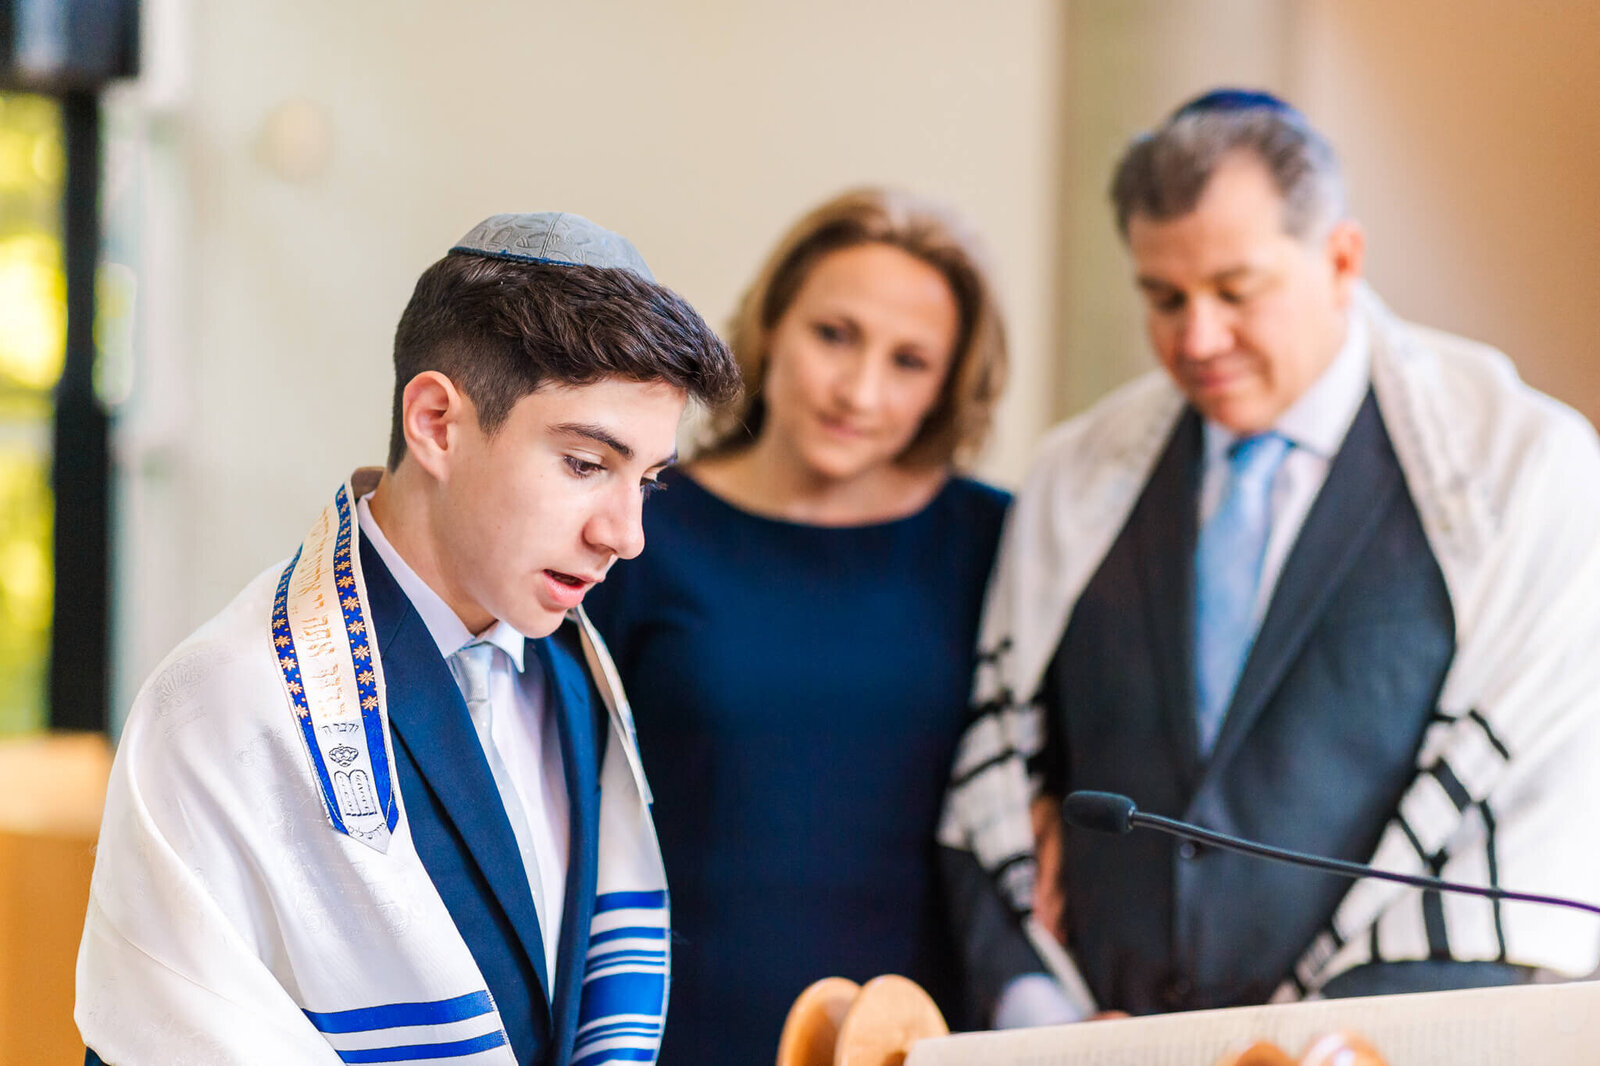 A teen boy in a blue suit and tallit performs the Haftarah with mom and dad looking on in an image in Bellevue Bar and Bat Mitzvah Photography